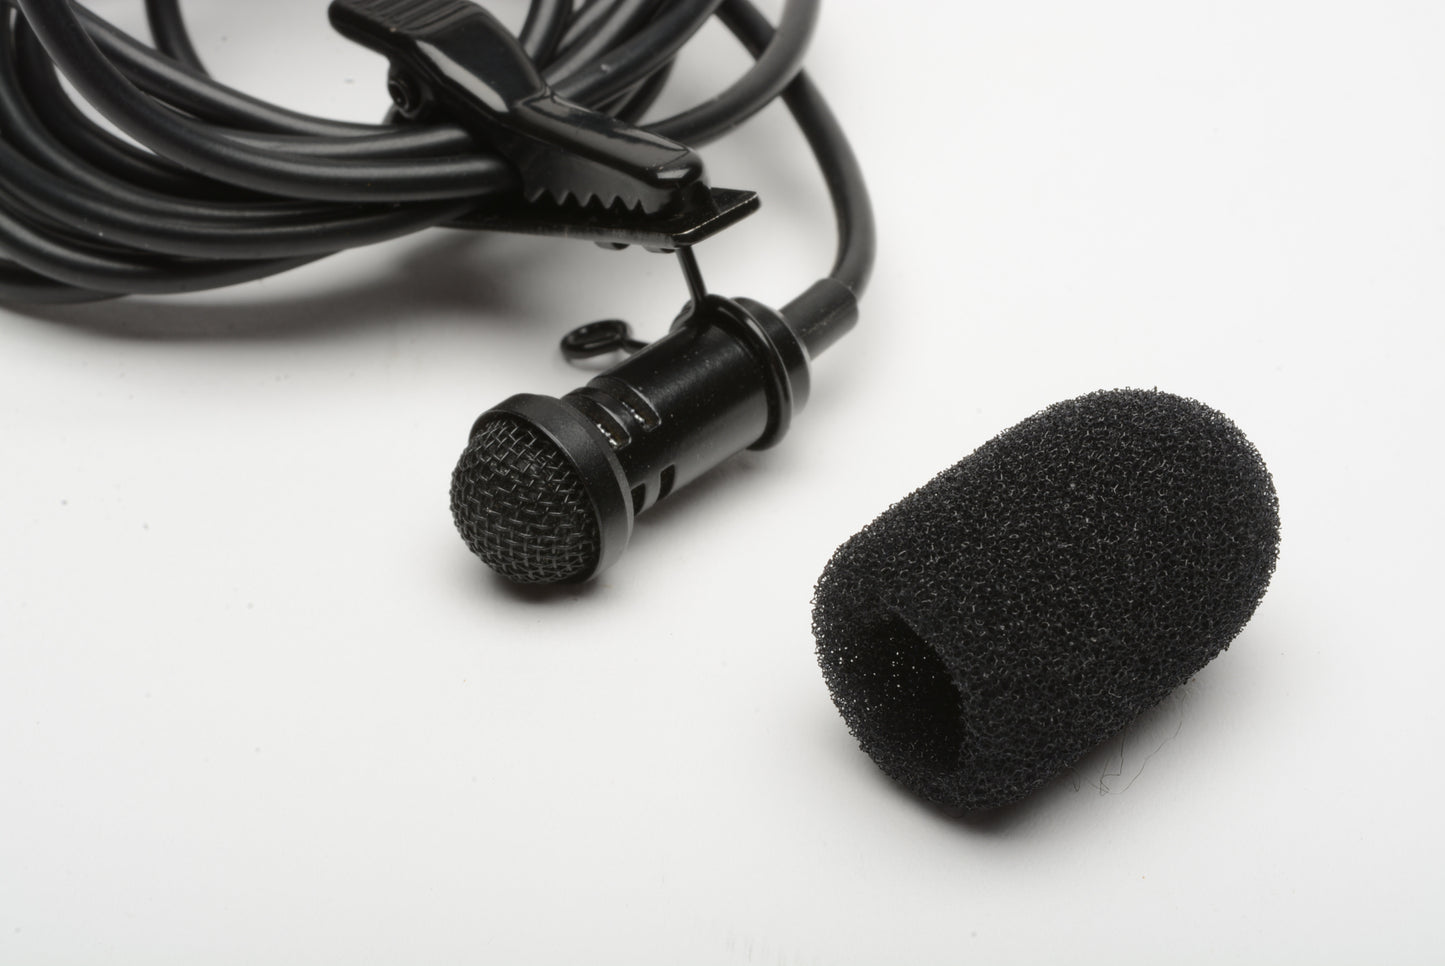 Lavalier Lapel Mic, nice quality, works great